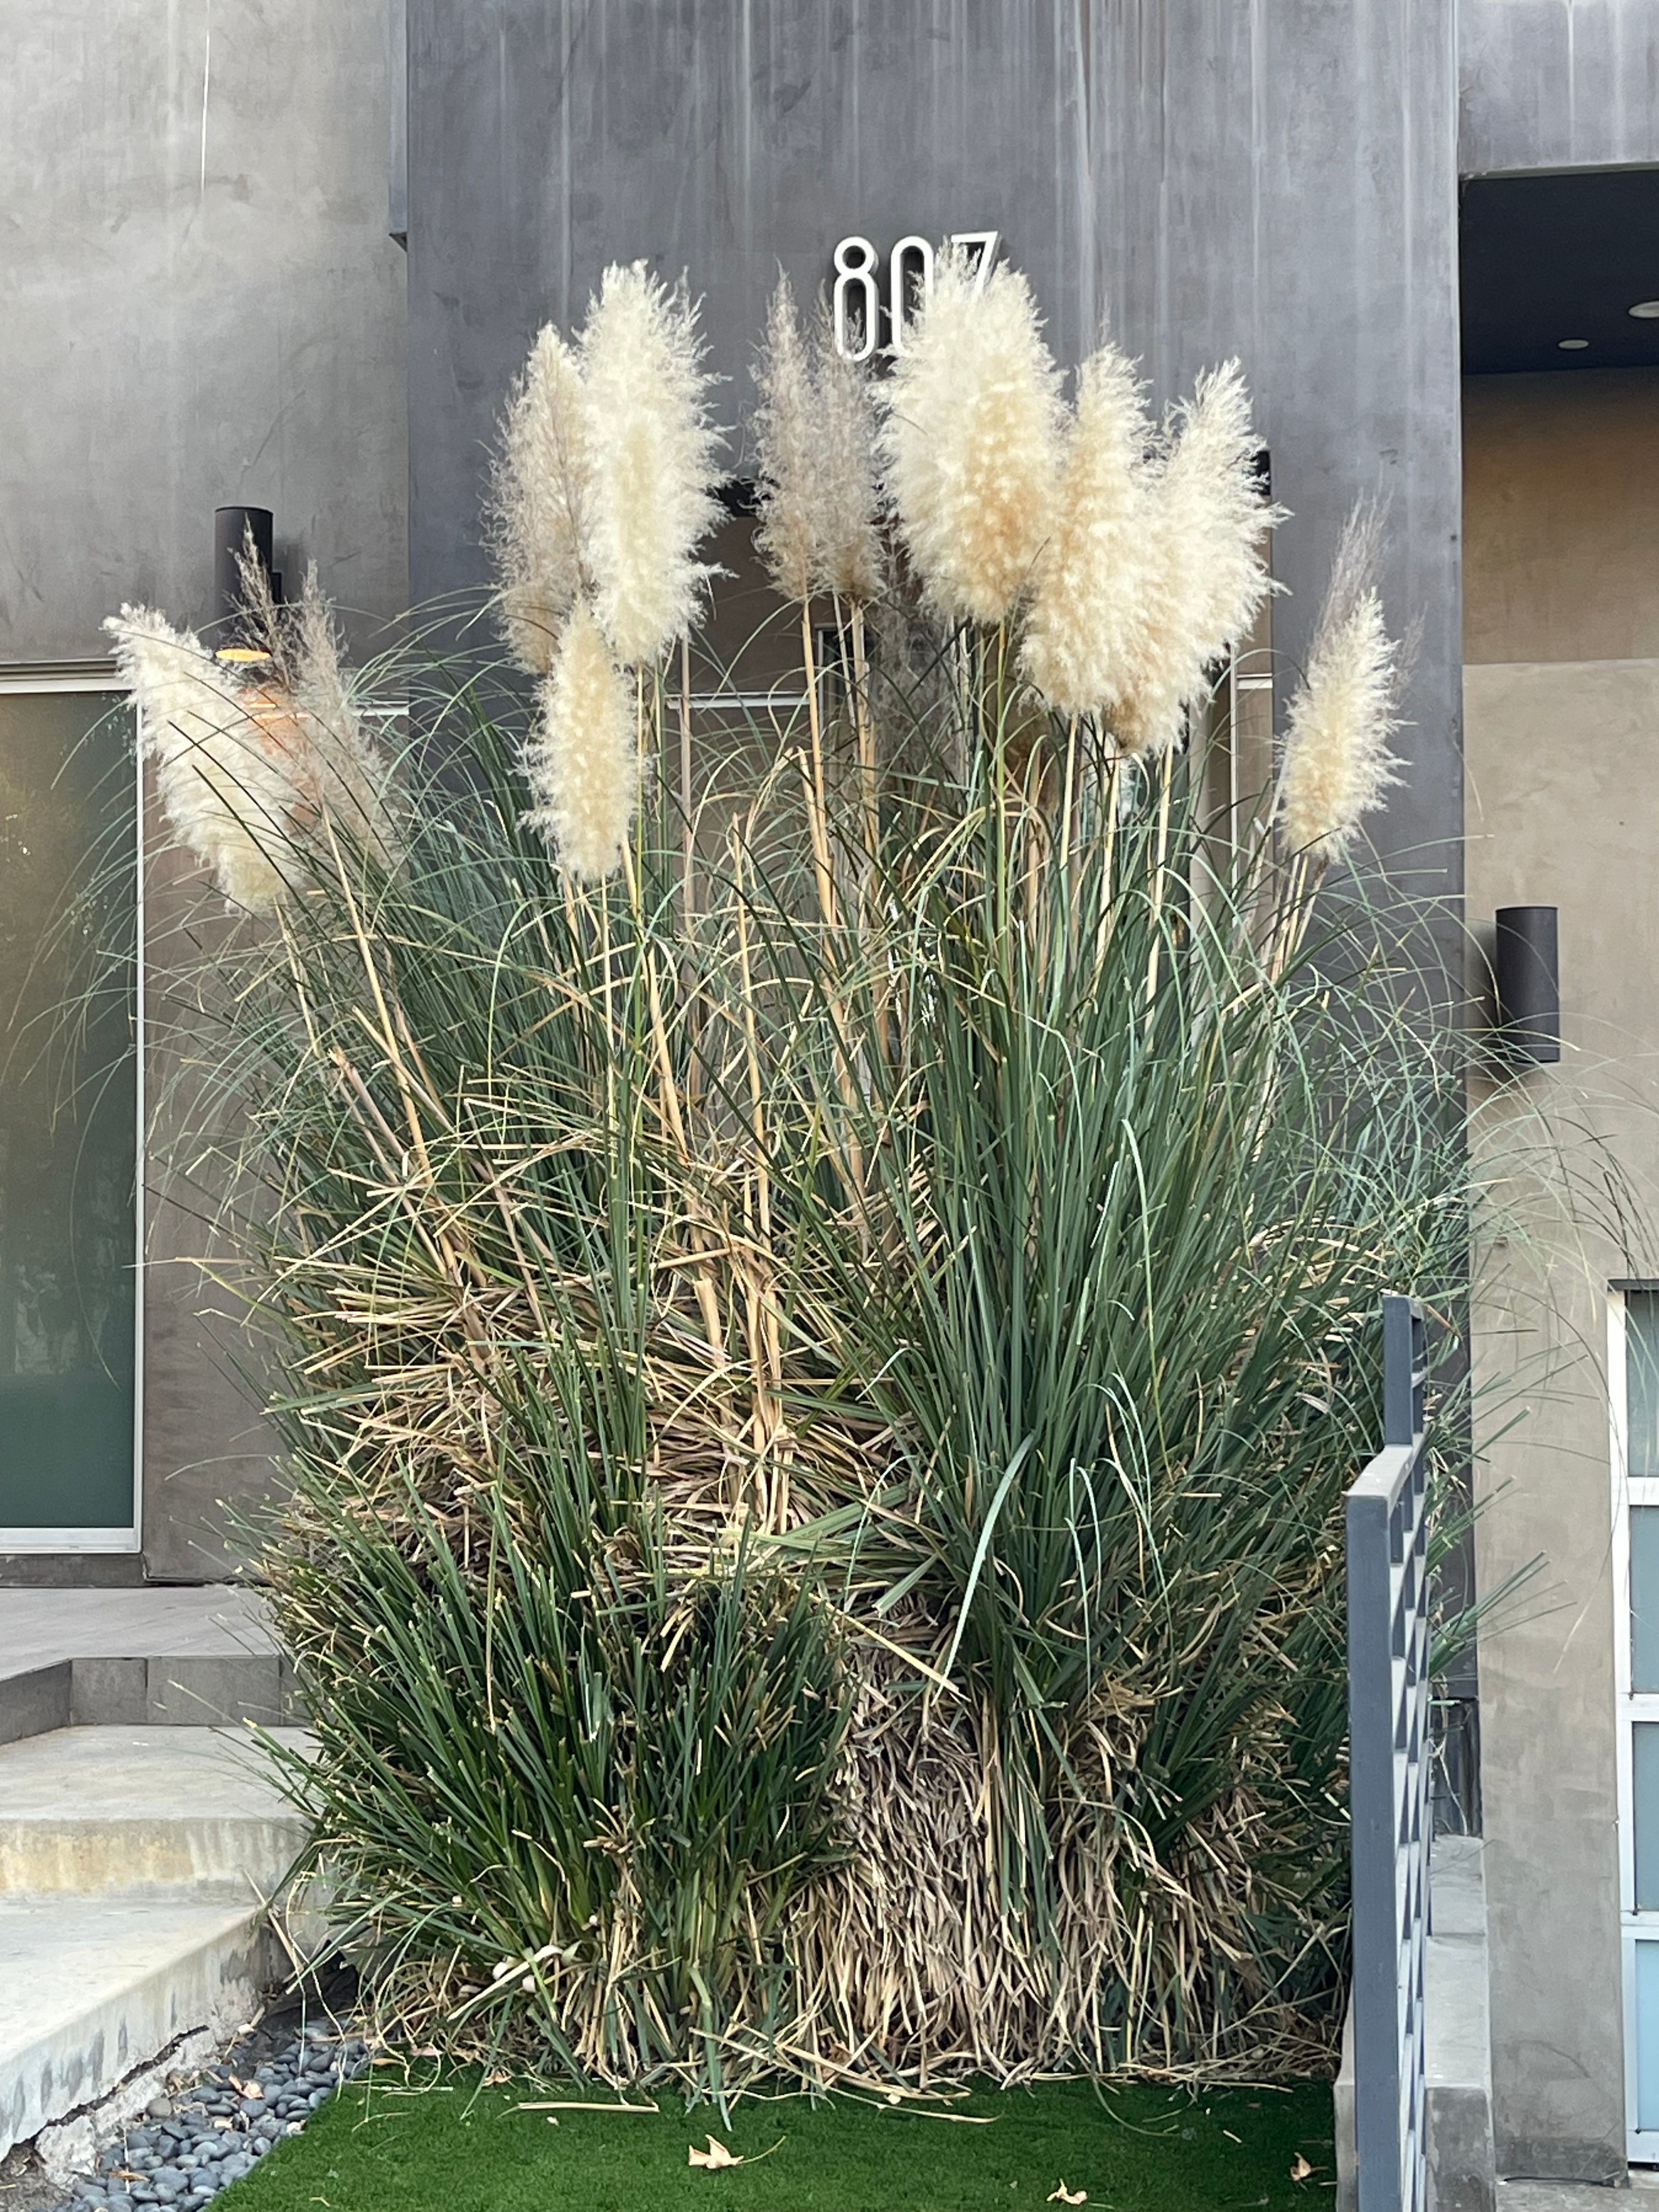 White Pampas Grass outside of a house